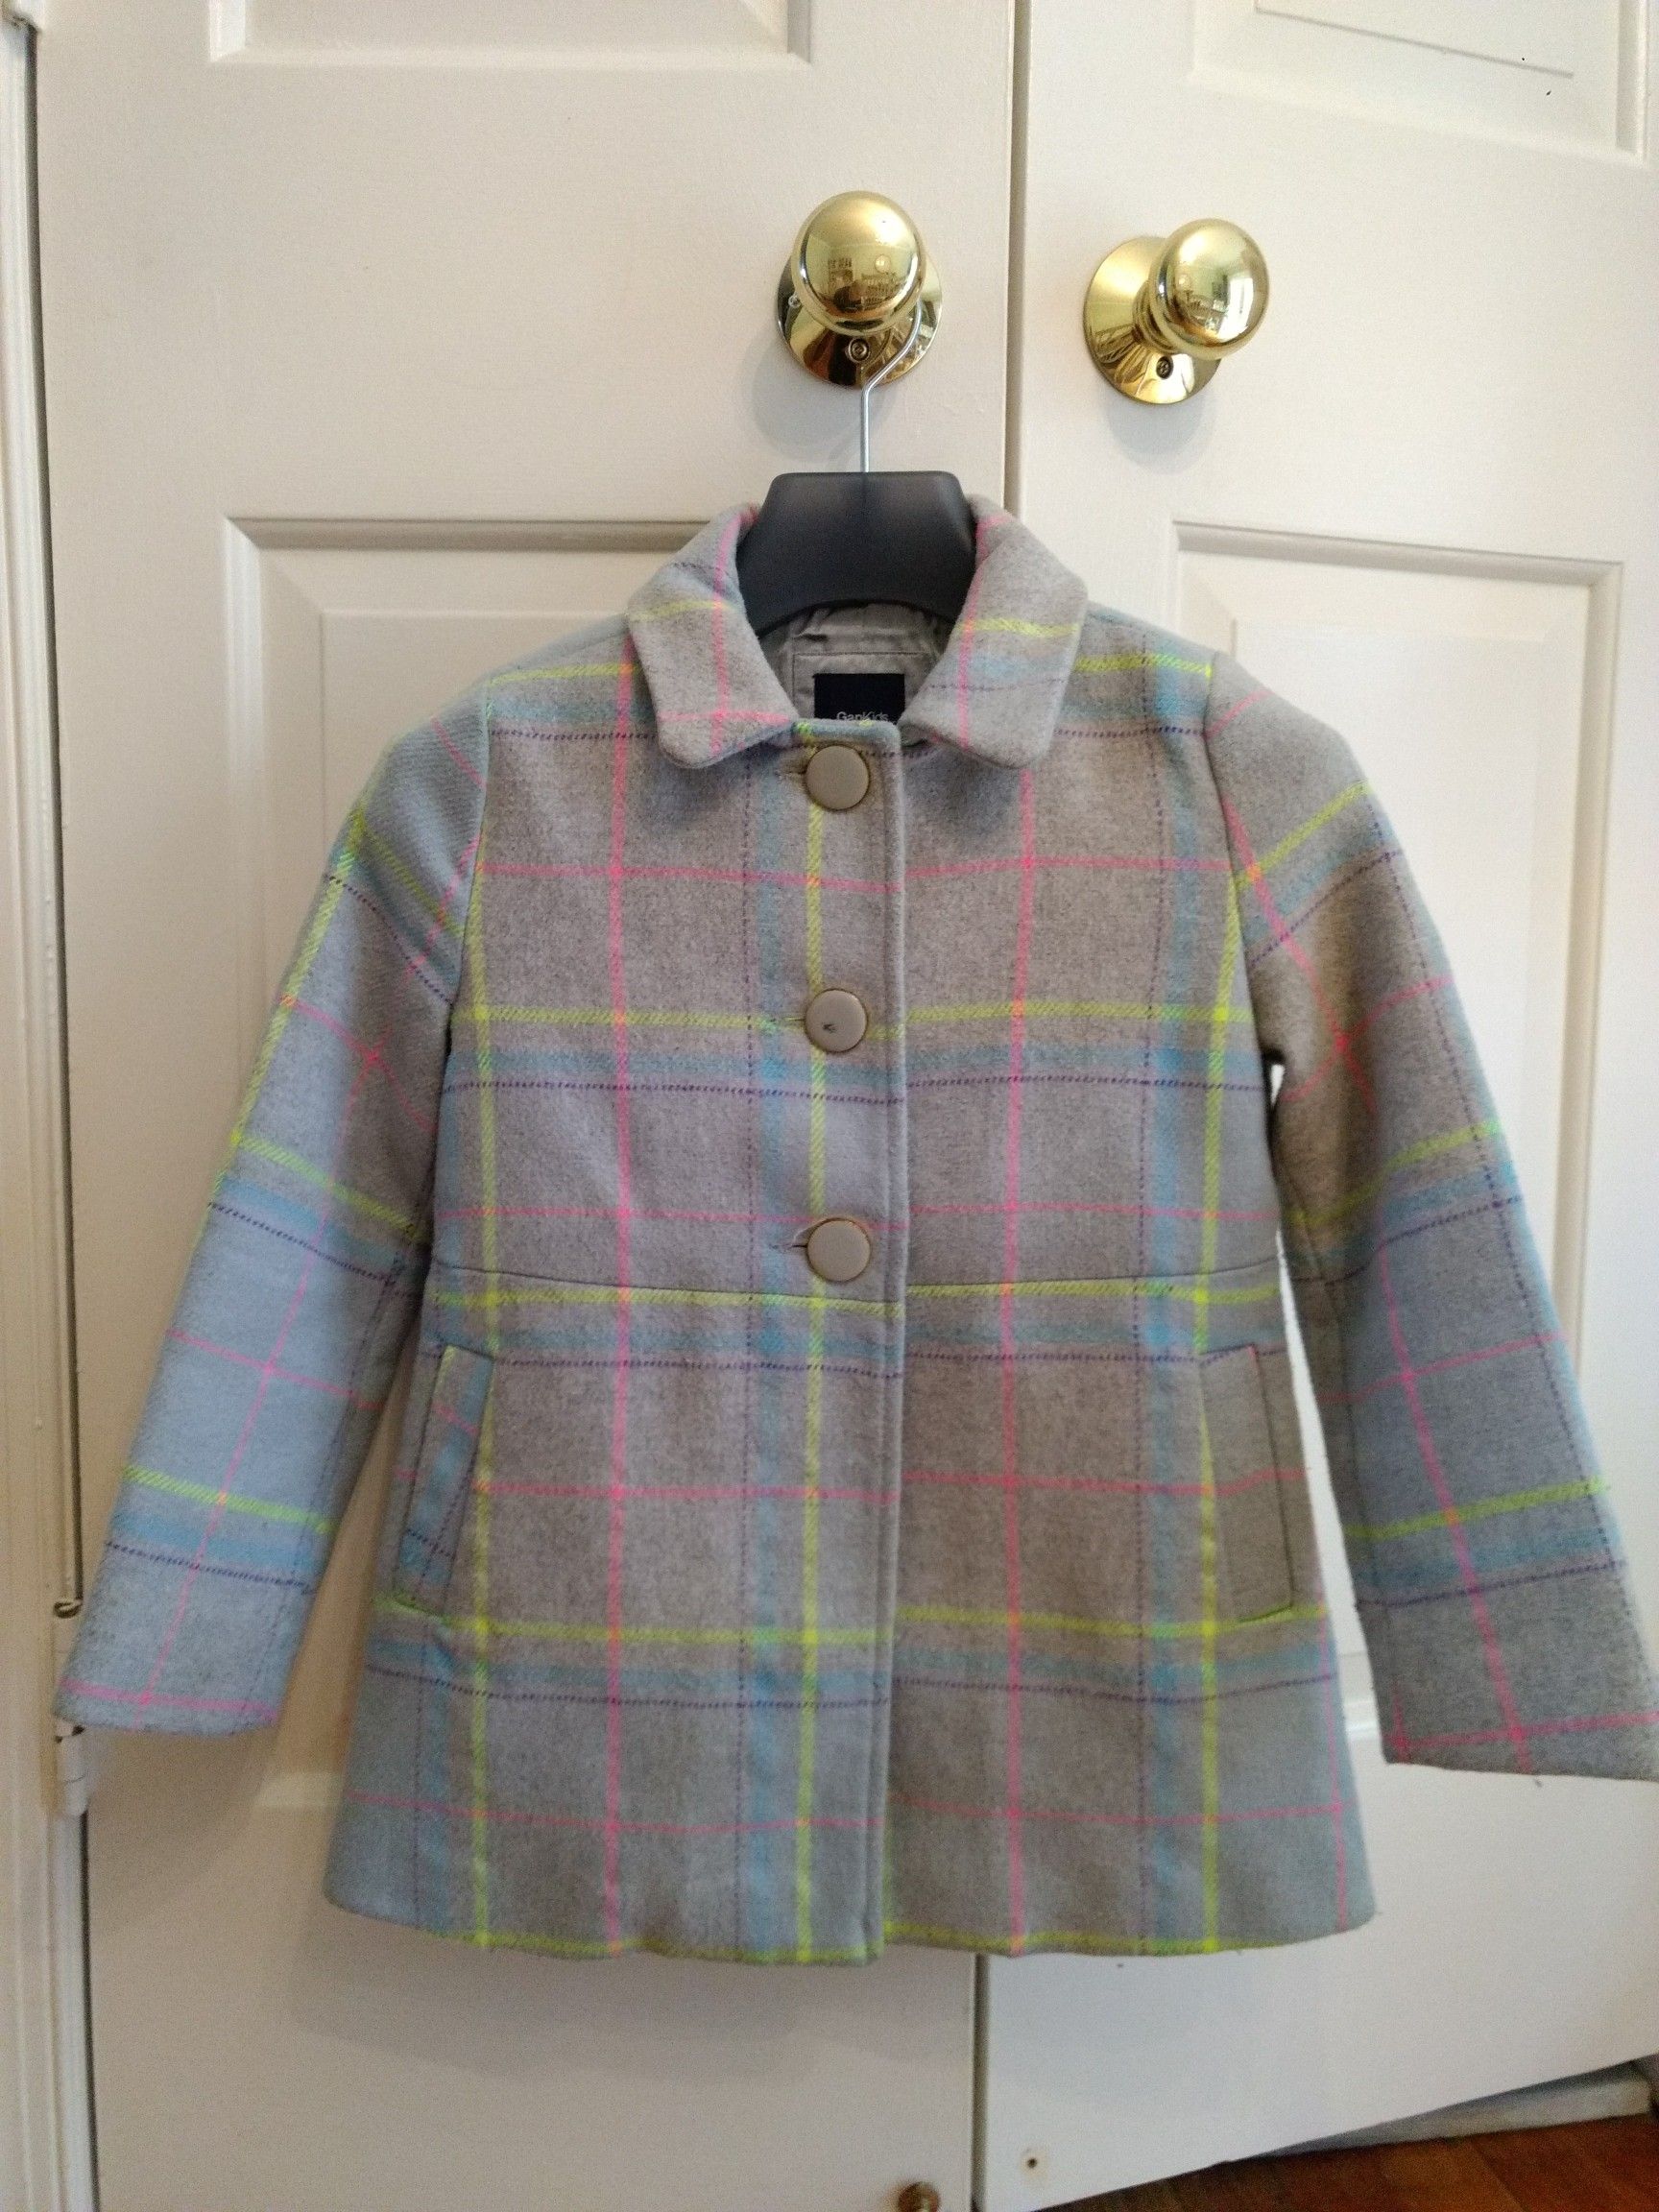 Jacket for girls 6-7, size S, by Gap Kids.